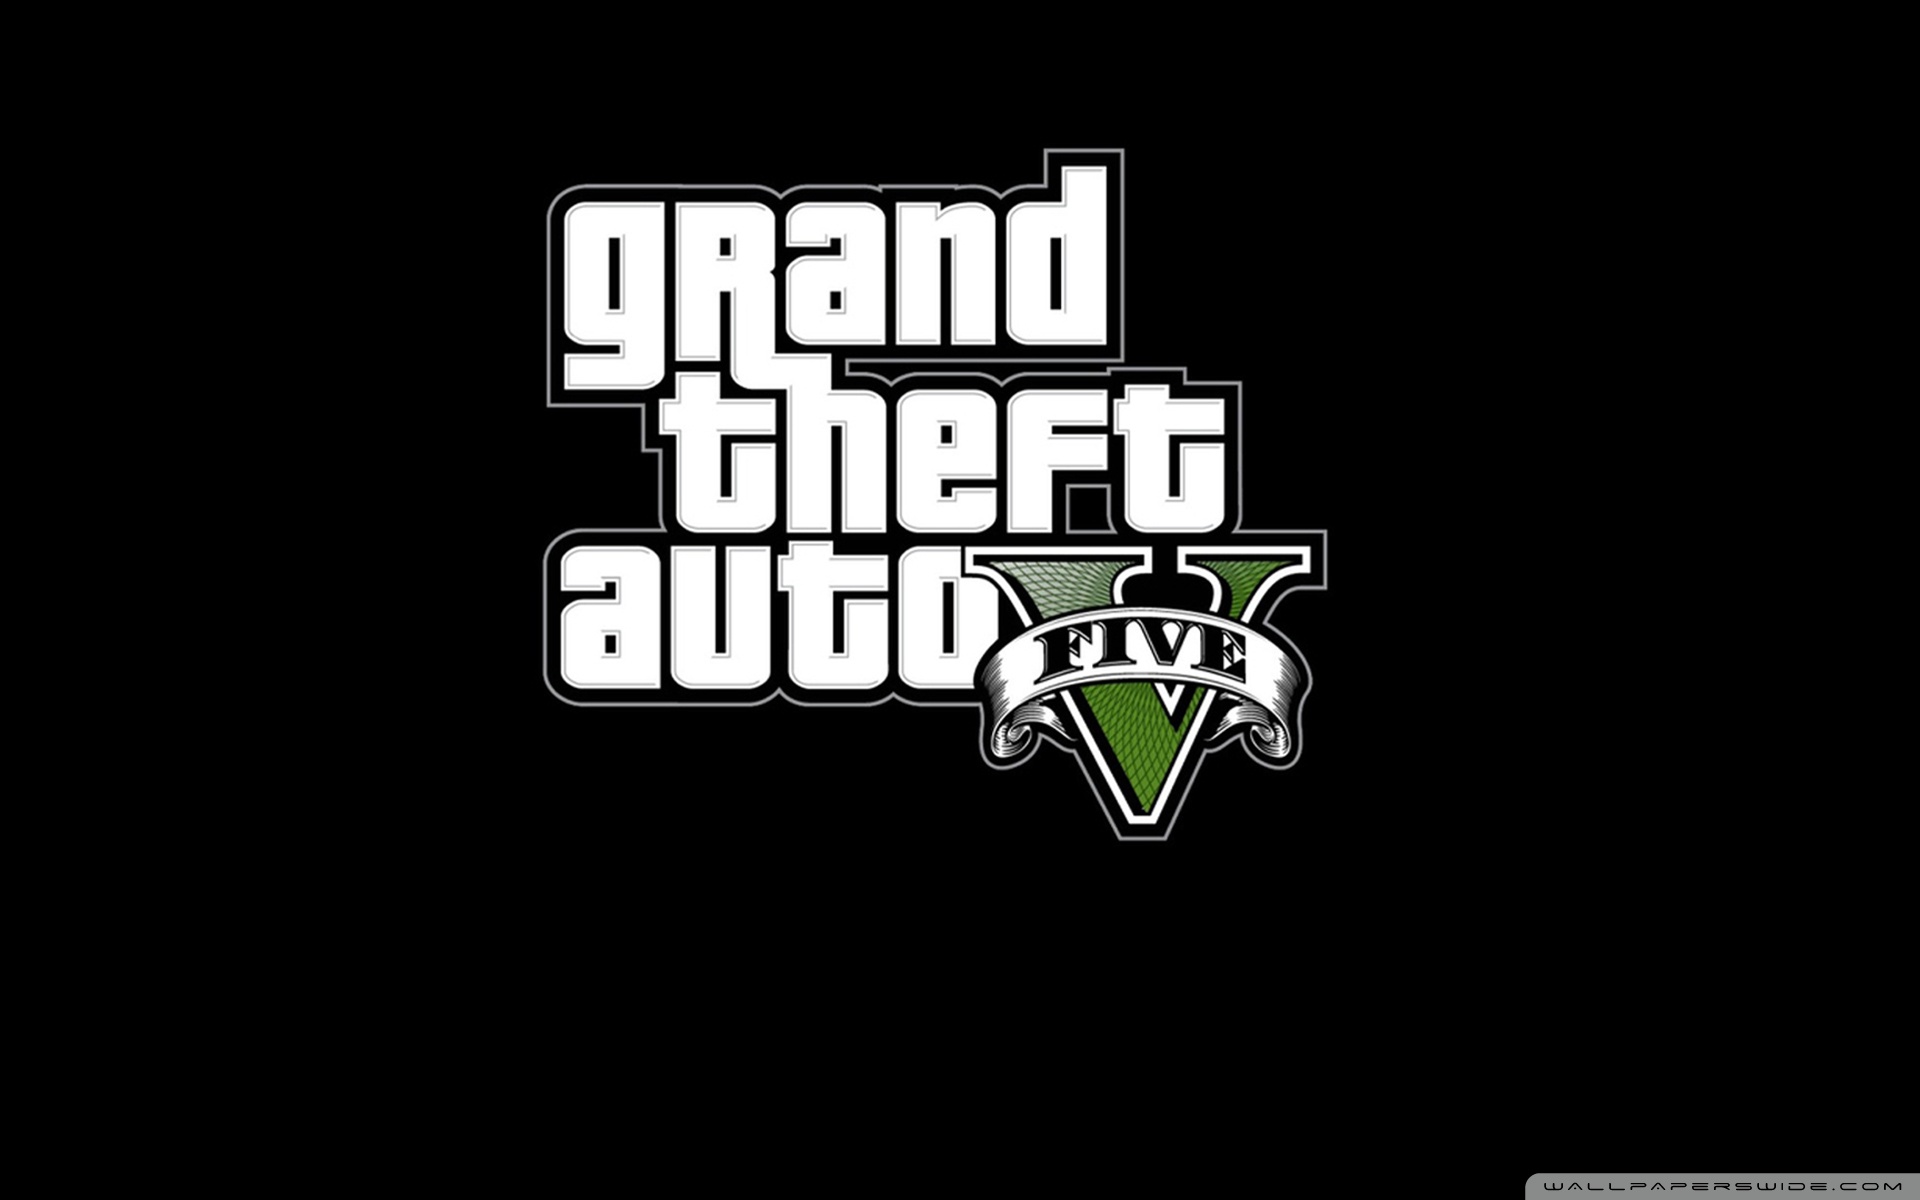 WallpapersWidecom Grand Theft Auto HD Desktop Wallpapers For